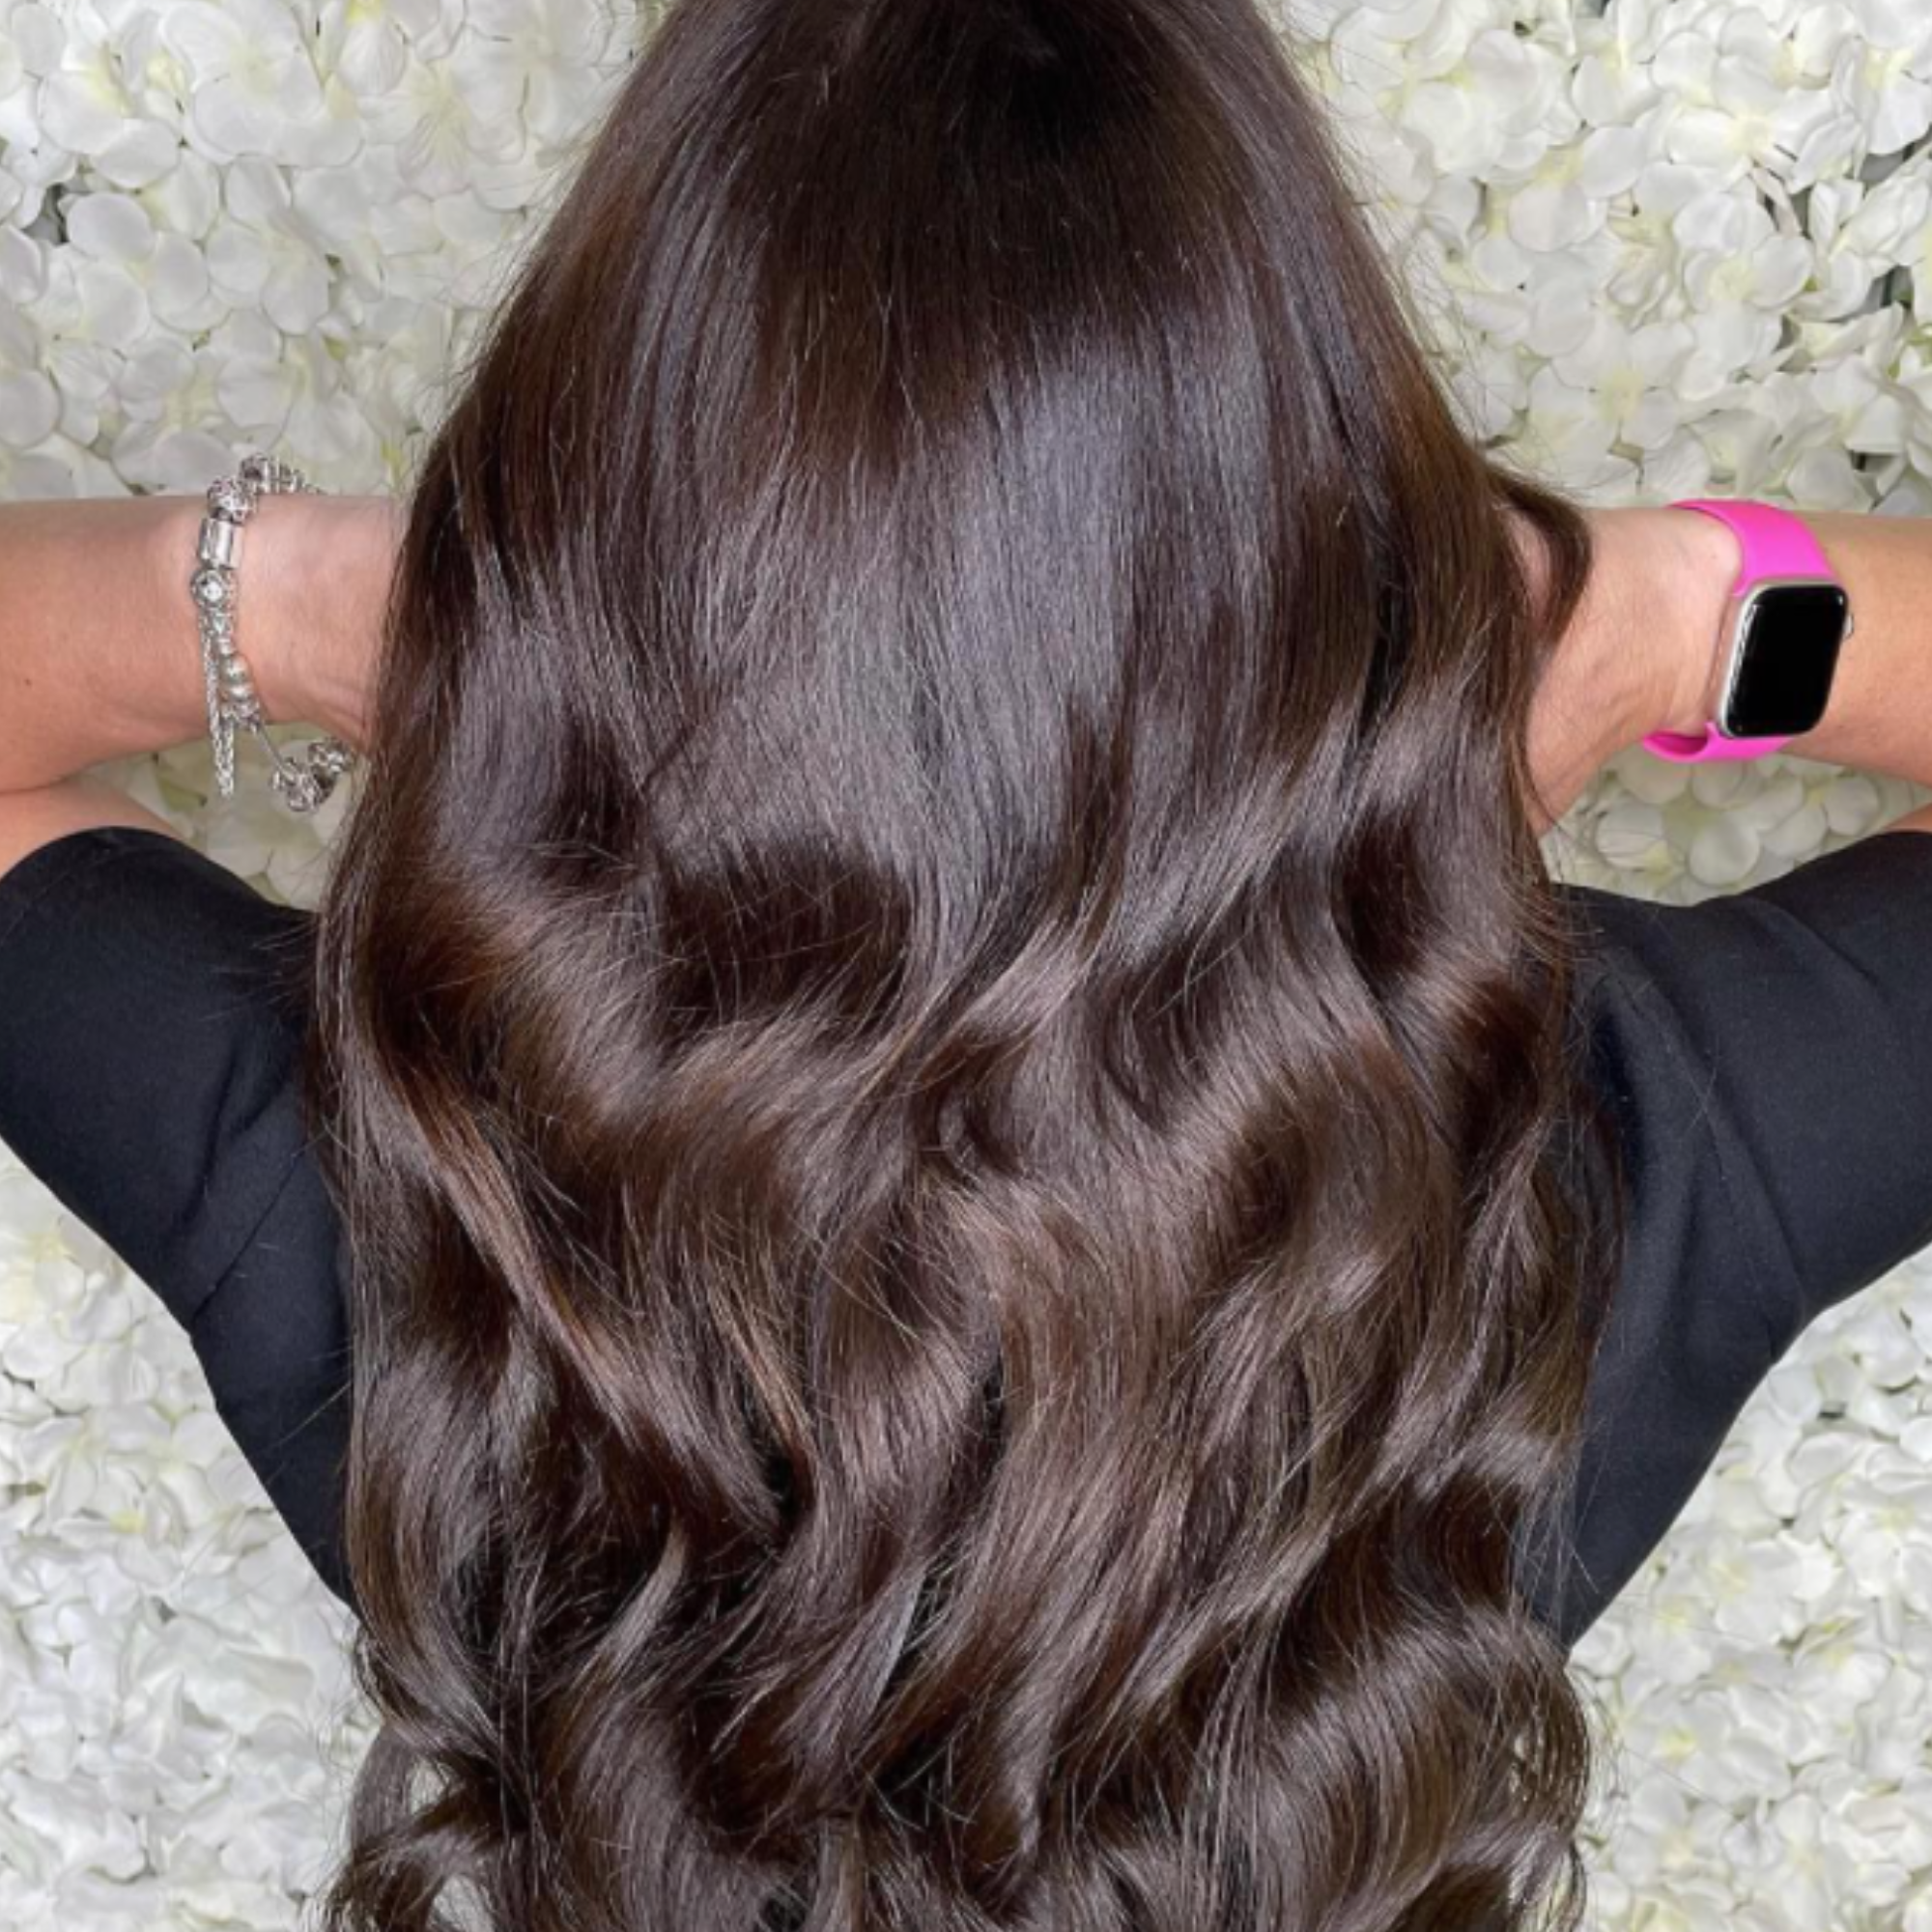 "customer wearing hair rehab london 24 inch ultimate clip-in hair extensions in brunette shade"